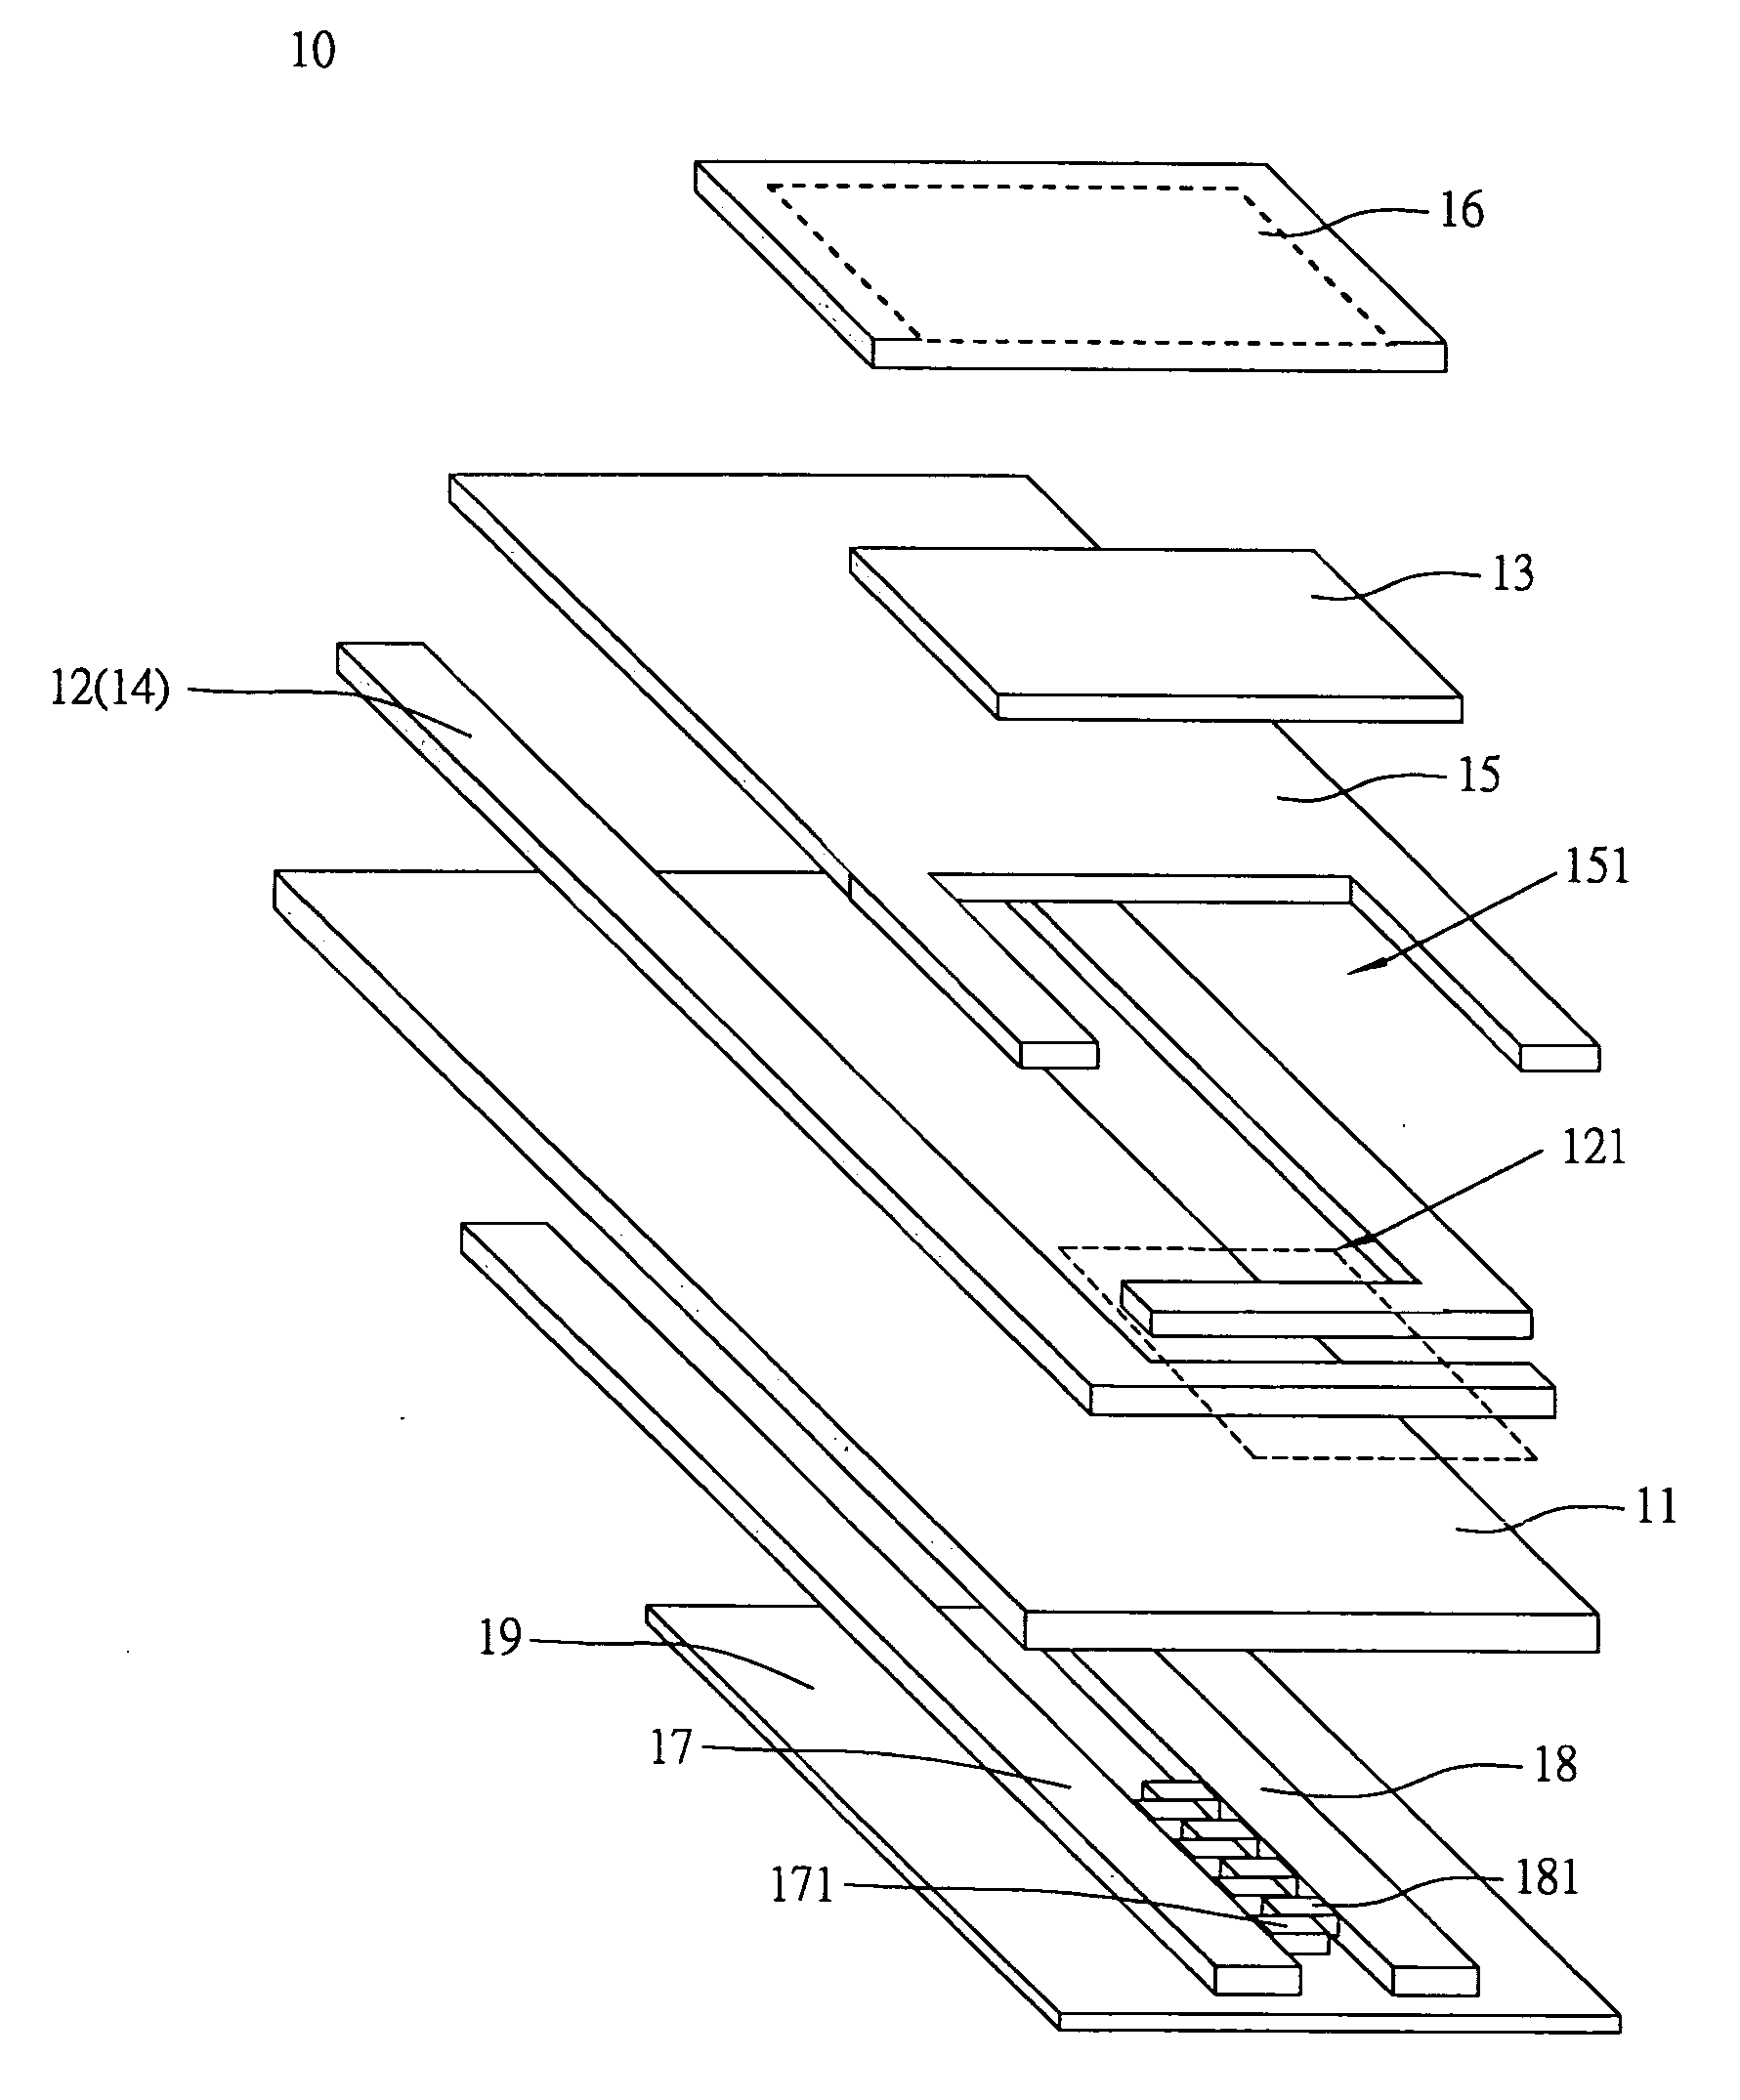 Biosensor having integrated heating element and electrode with metallic catalyst